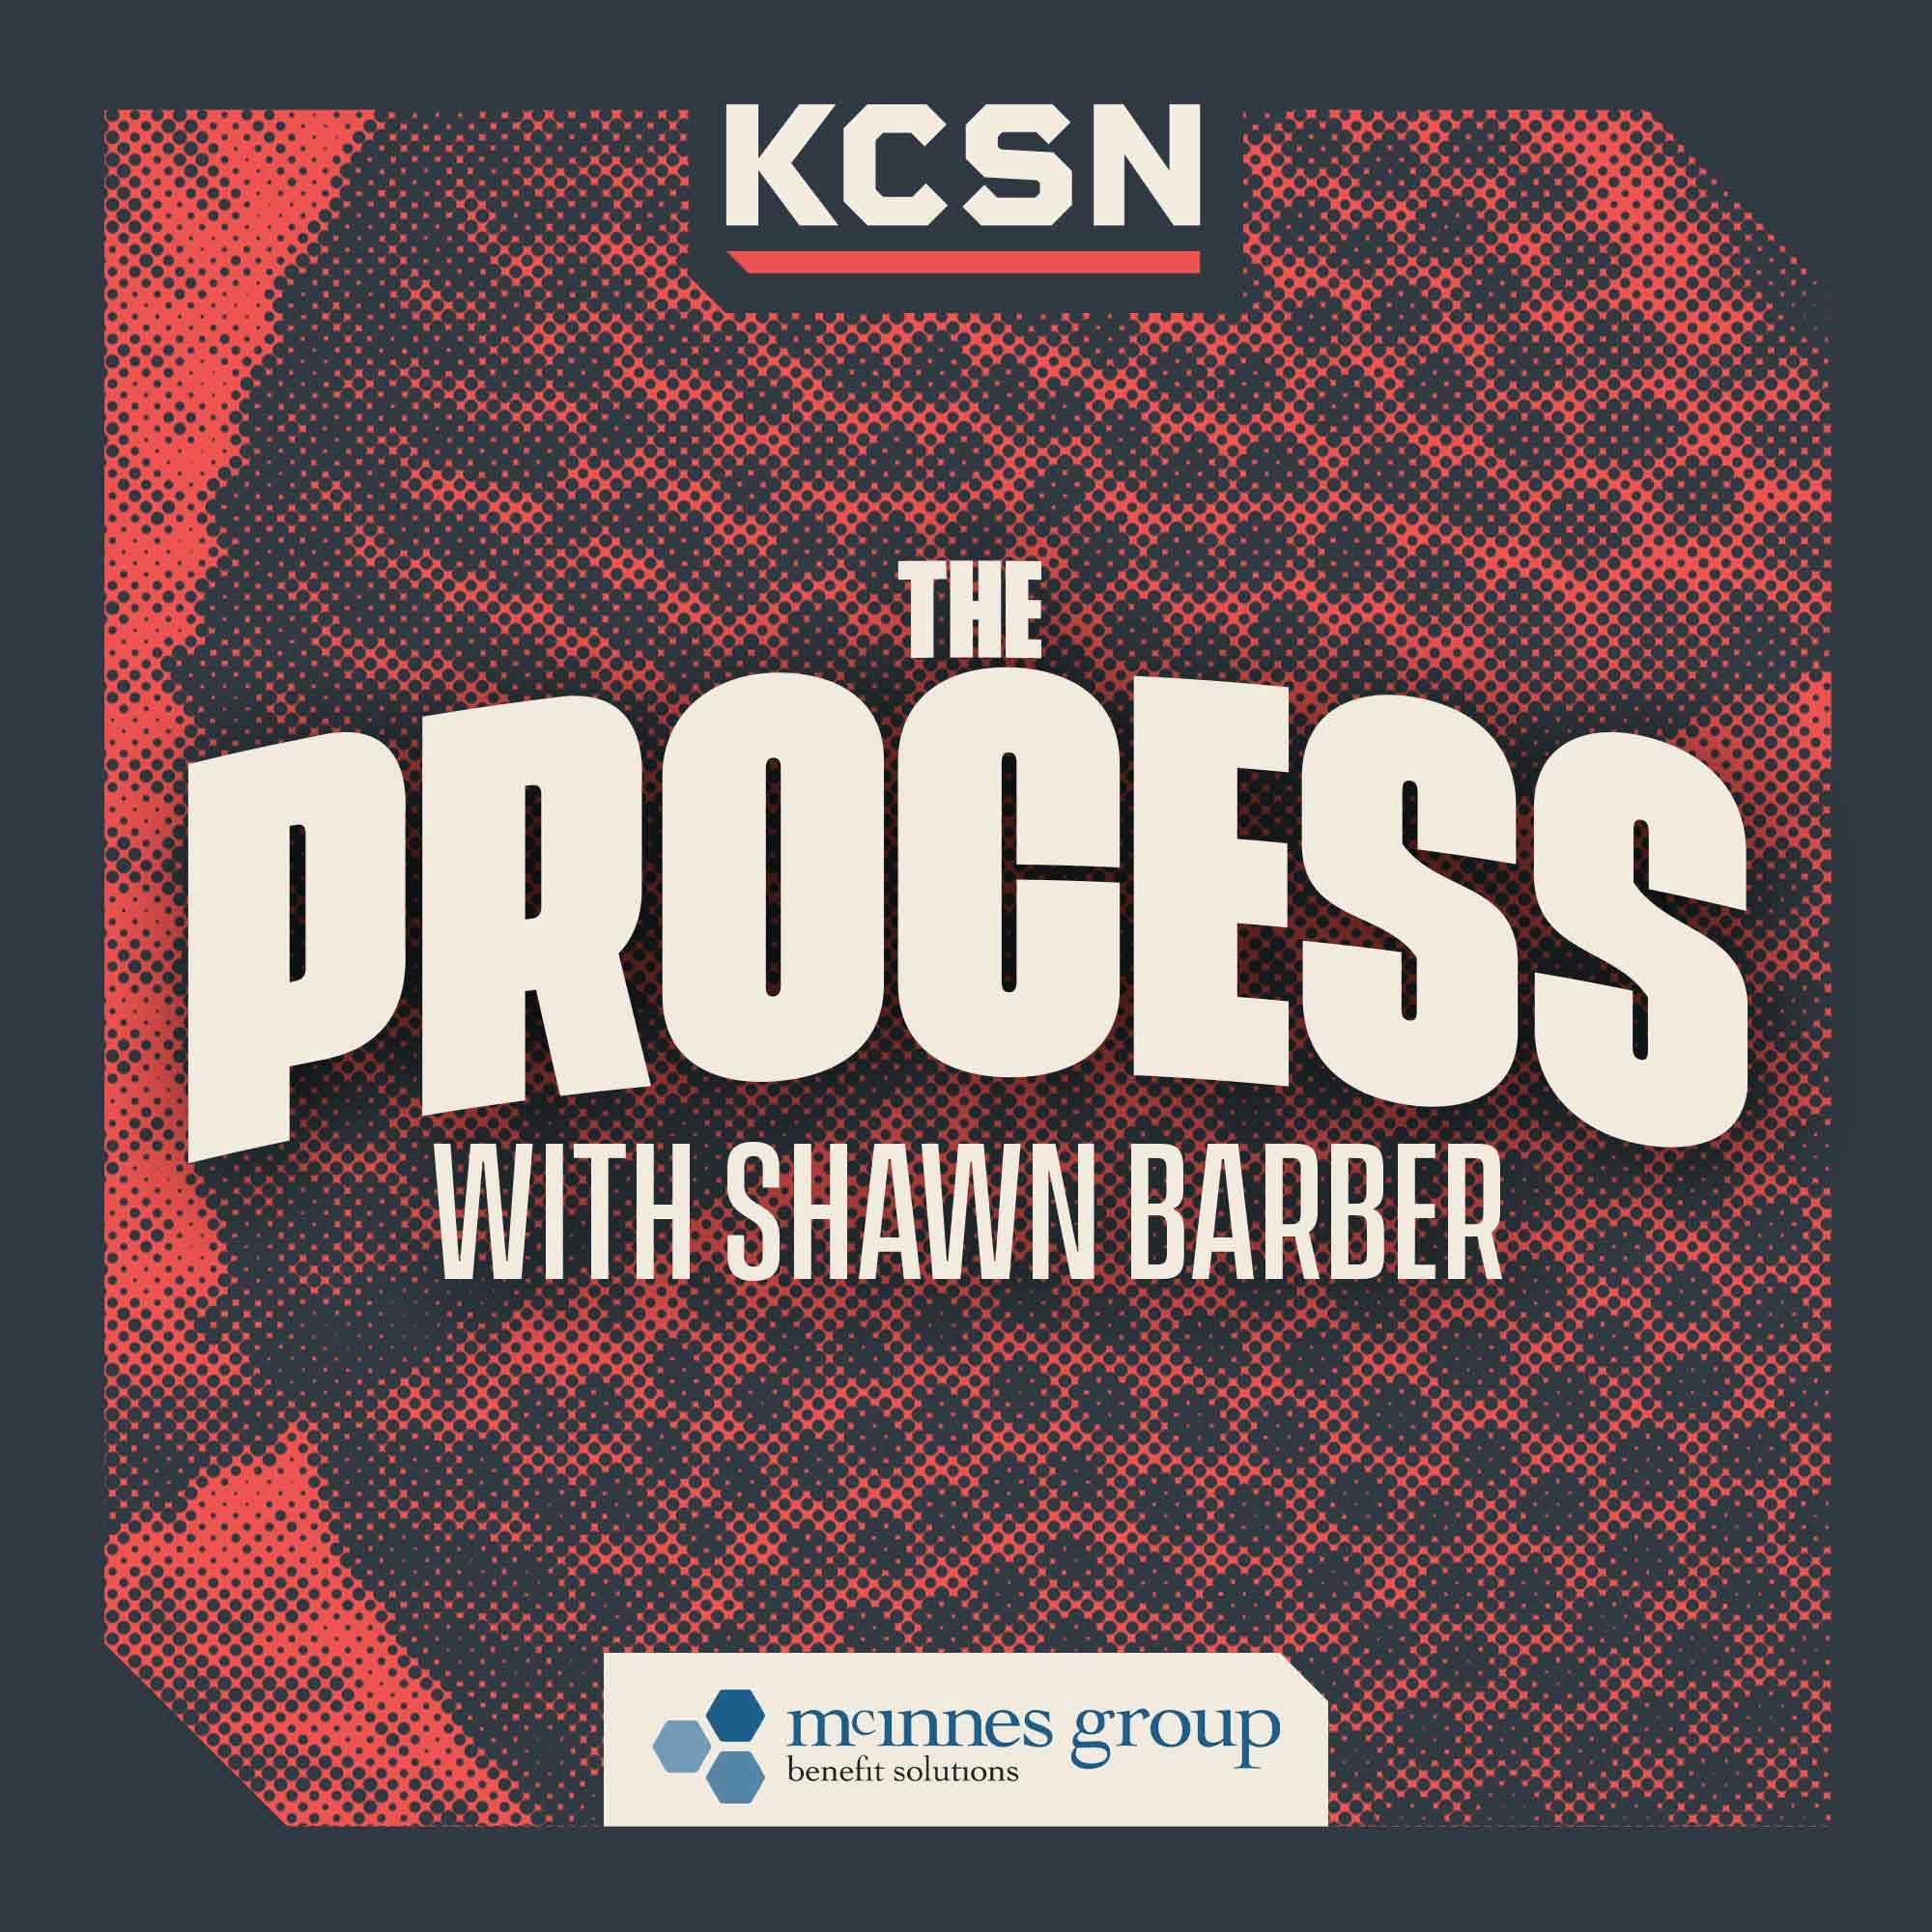 The Process 1/31: Chiefs Flip Switch in Playoffs — Patrick Mahomes, Travis Kelce Go Off in AFC Title Win